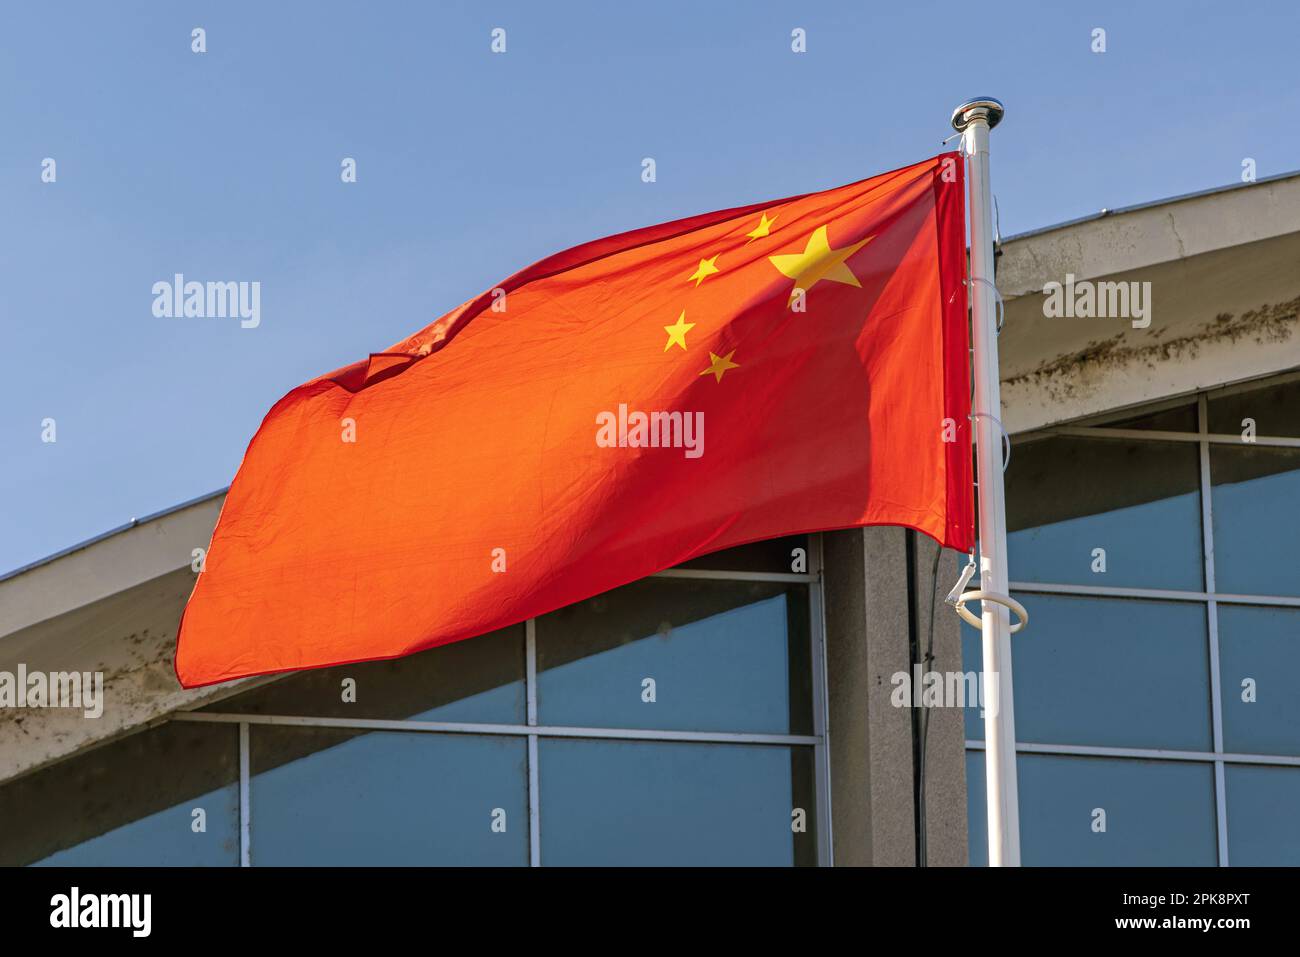 Red Flag People Republic of China vor dem Saal Stockfoto